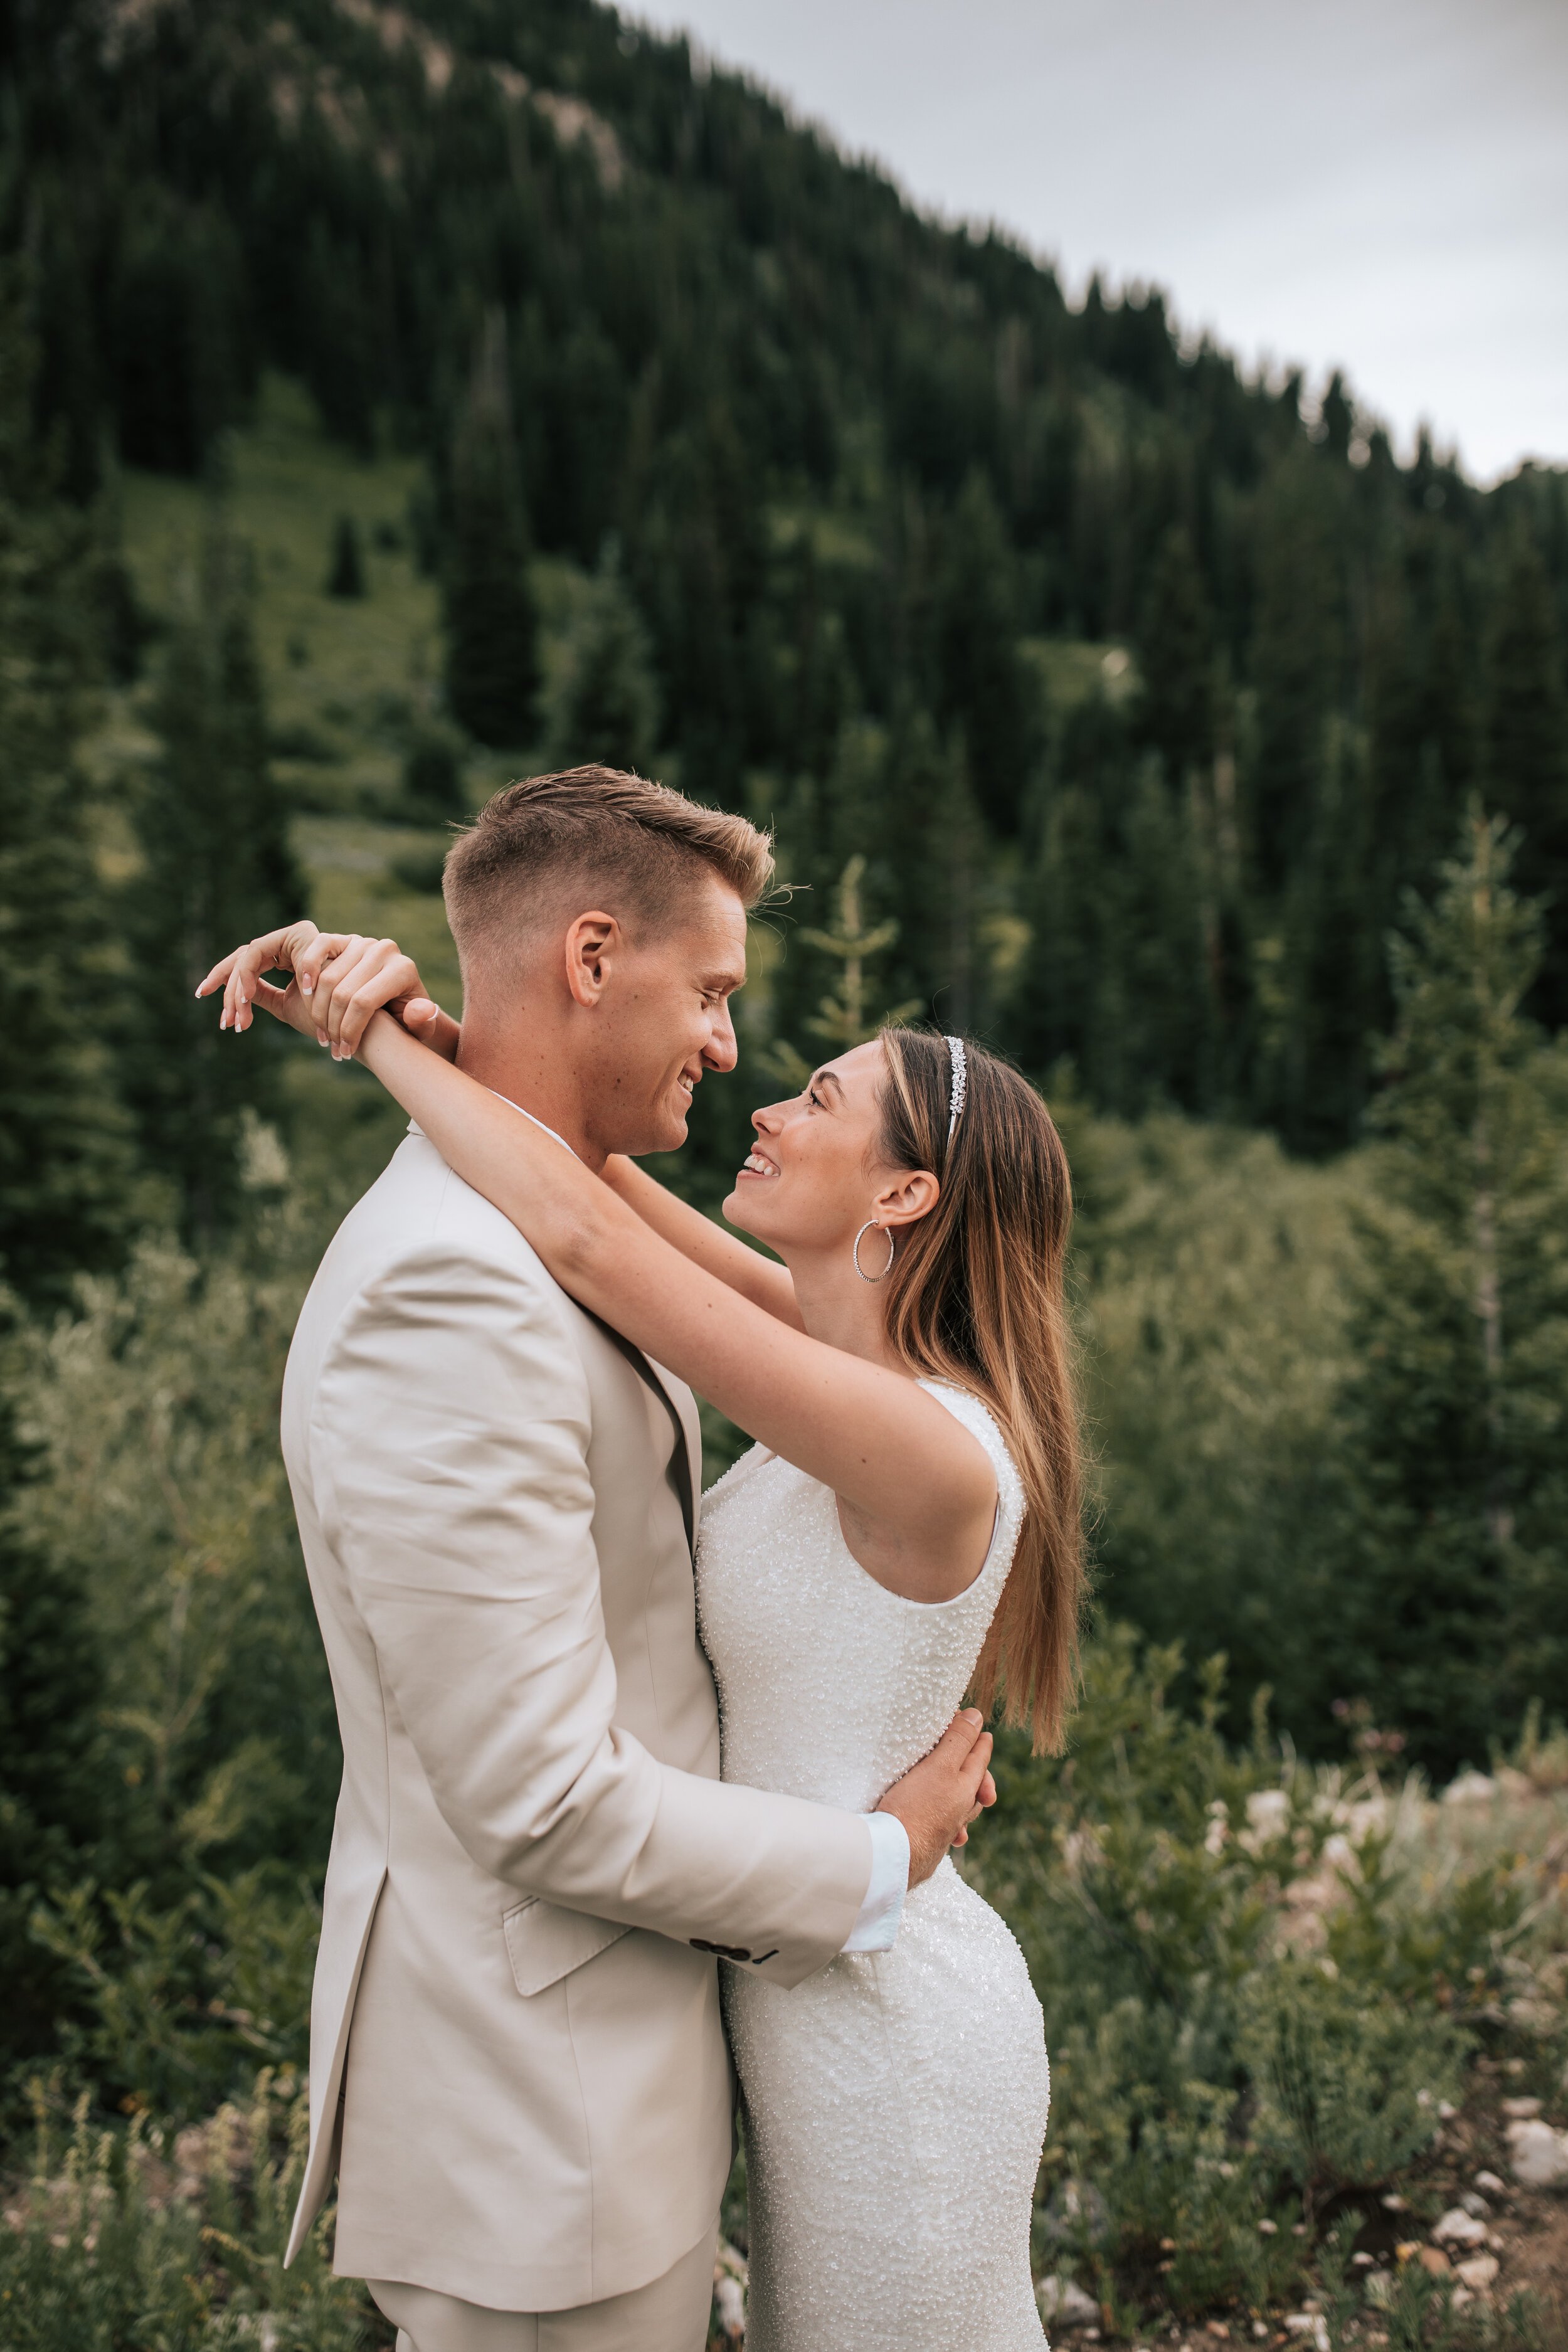  In the mountains or Northern Utah a bride puts her arms around her groom and looks lovingly into his eyes by Emily Jenkins Photography. elope in the mountains elopement locations fitted wedding gown #emilyjenkinsphotography #emilyjenkinselopements #